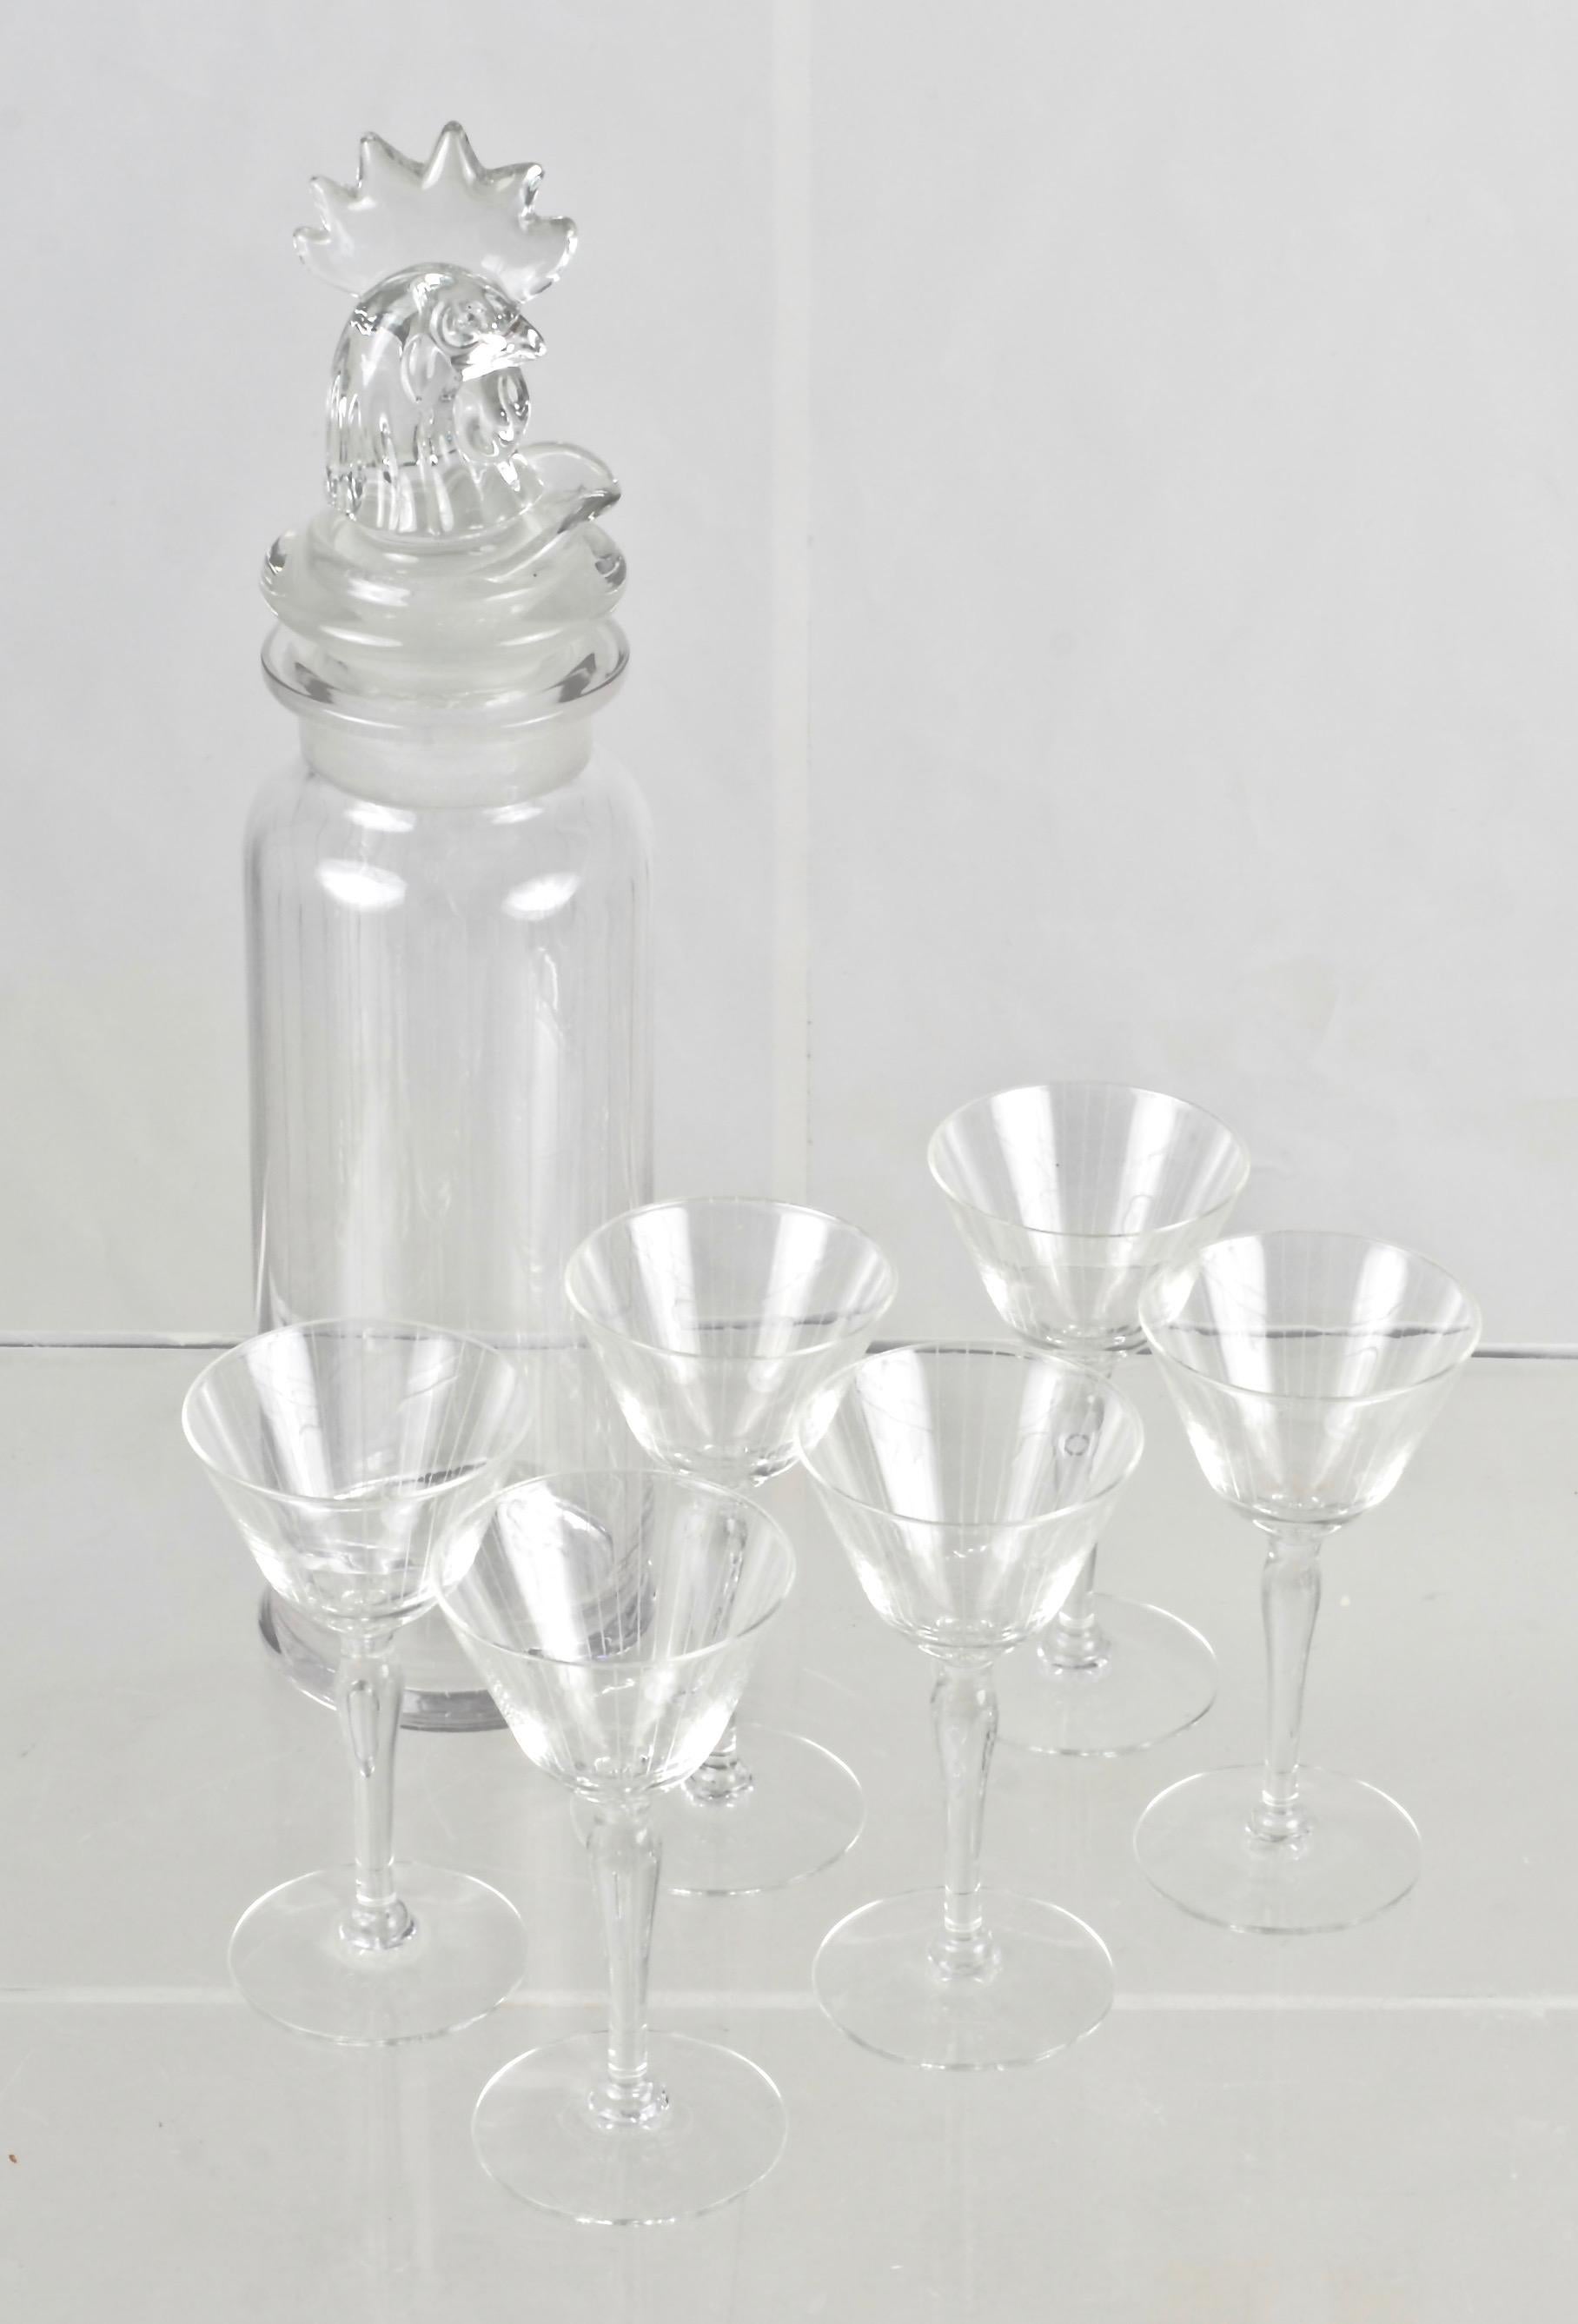 Signed Heisey glass cocktail shaker with finely figured rooster top resting in pouring spout with perforations. Subtle vertical stripe detail incised on both the shaker and the cocktail glasses. Five cocktail glasses in set. Shaker measures 3.5